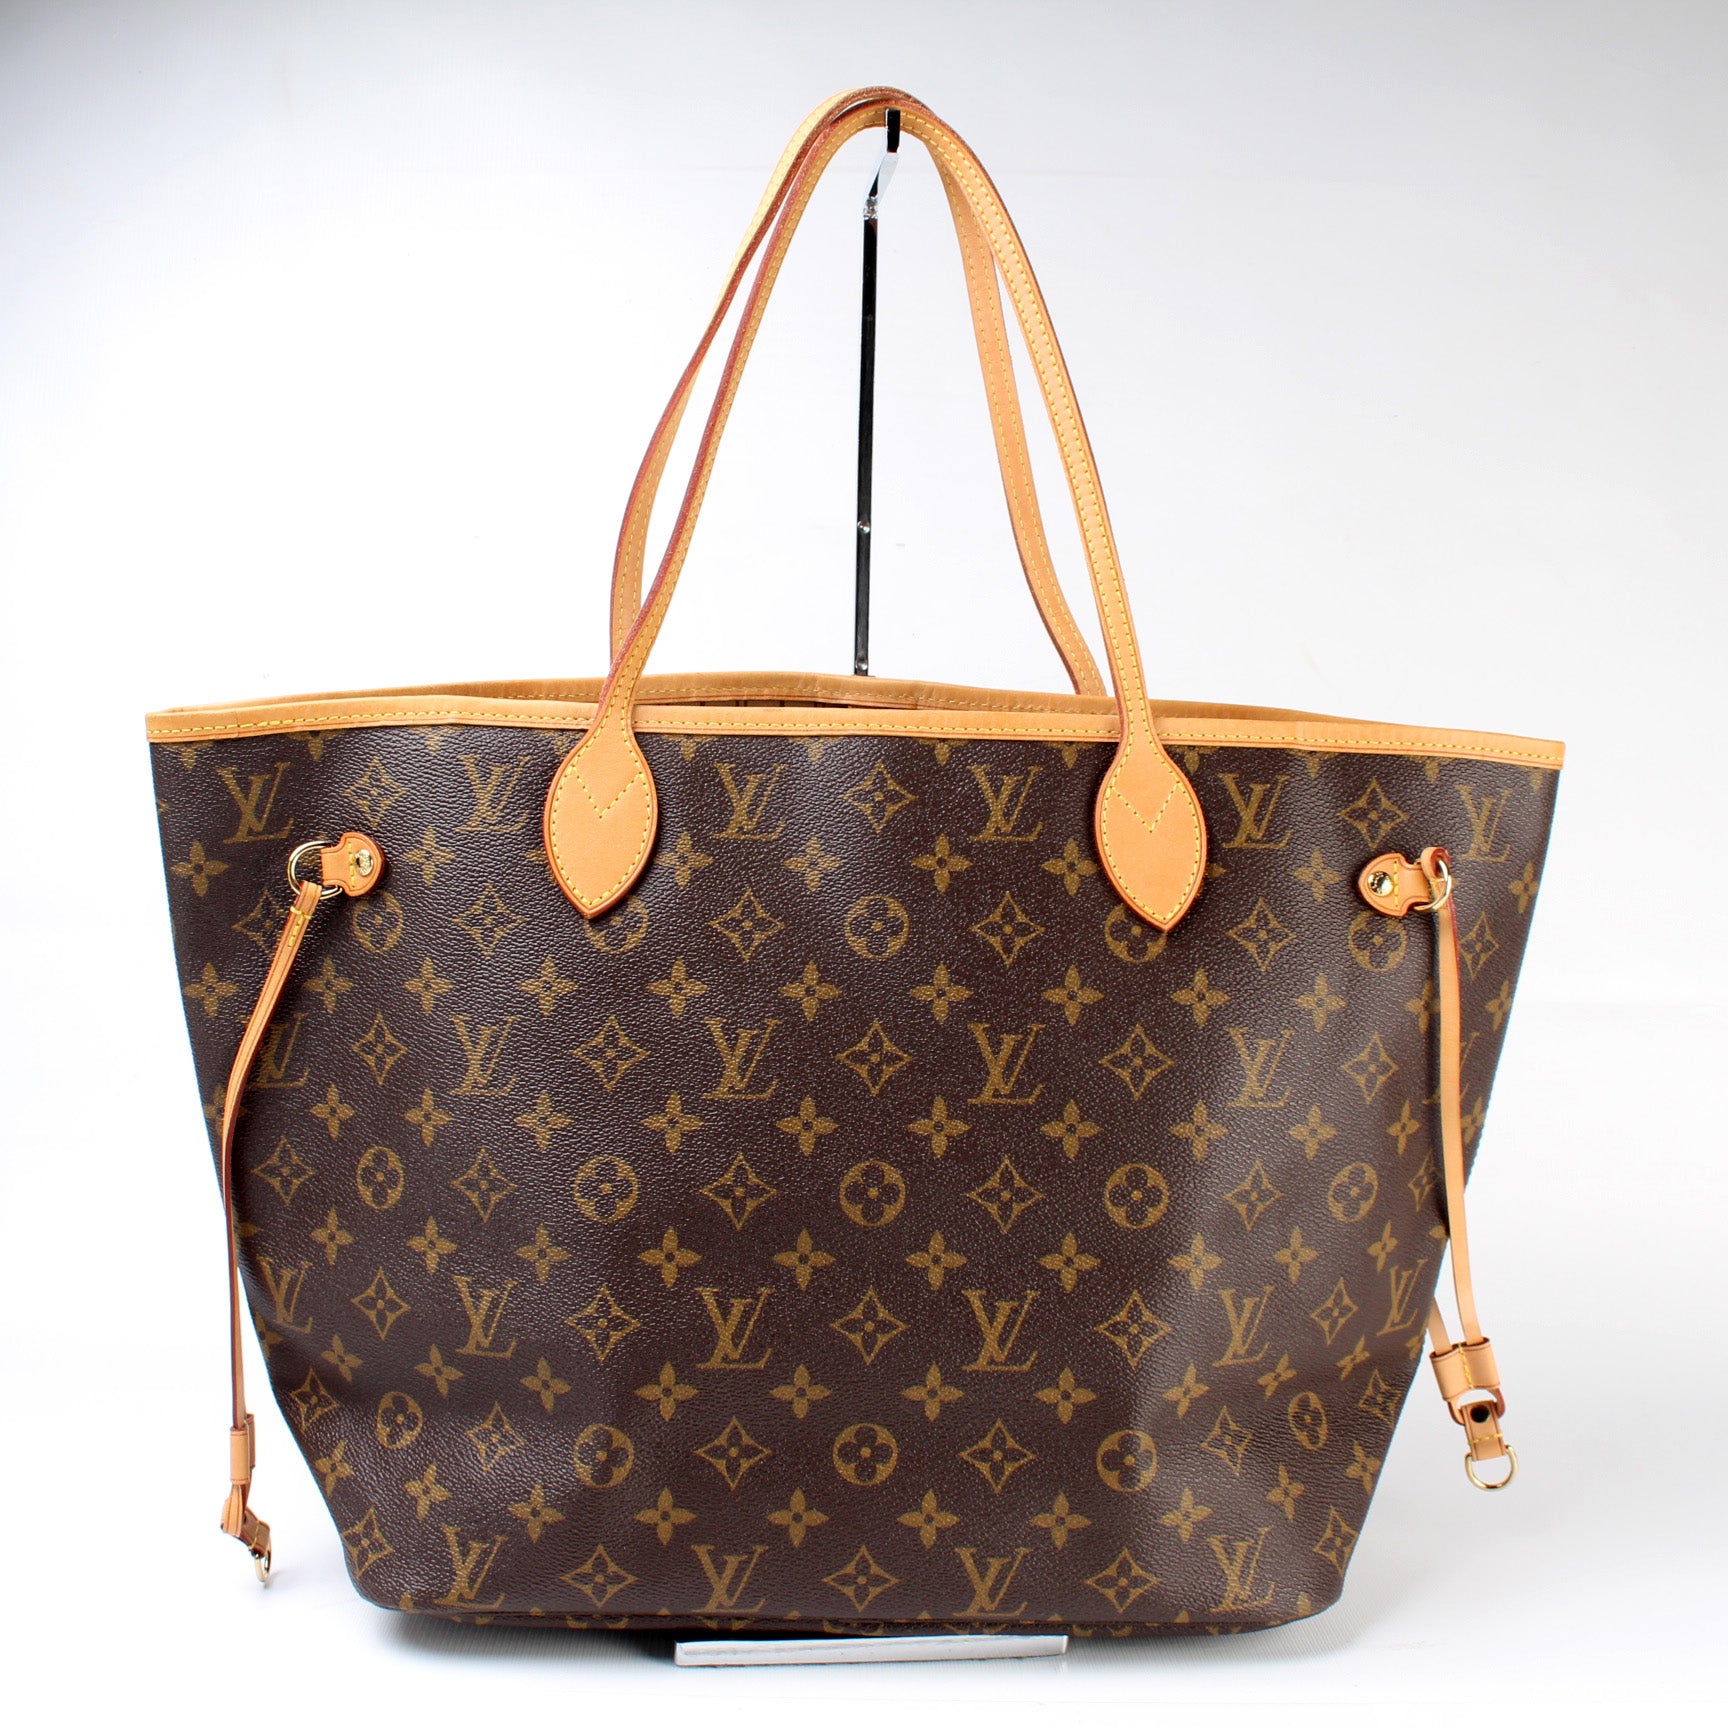 How To Clean Louis Vuitton Bag In 5 Minutes! (NEVERFULL HANDBAG